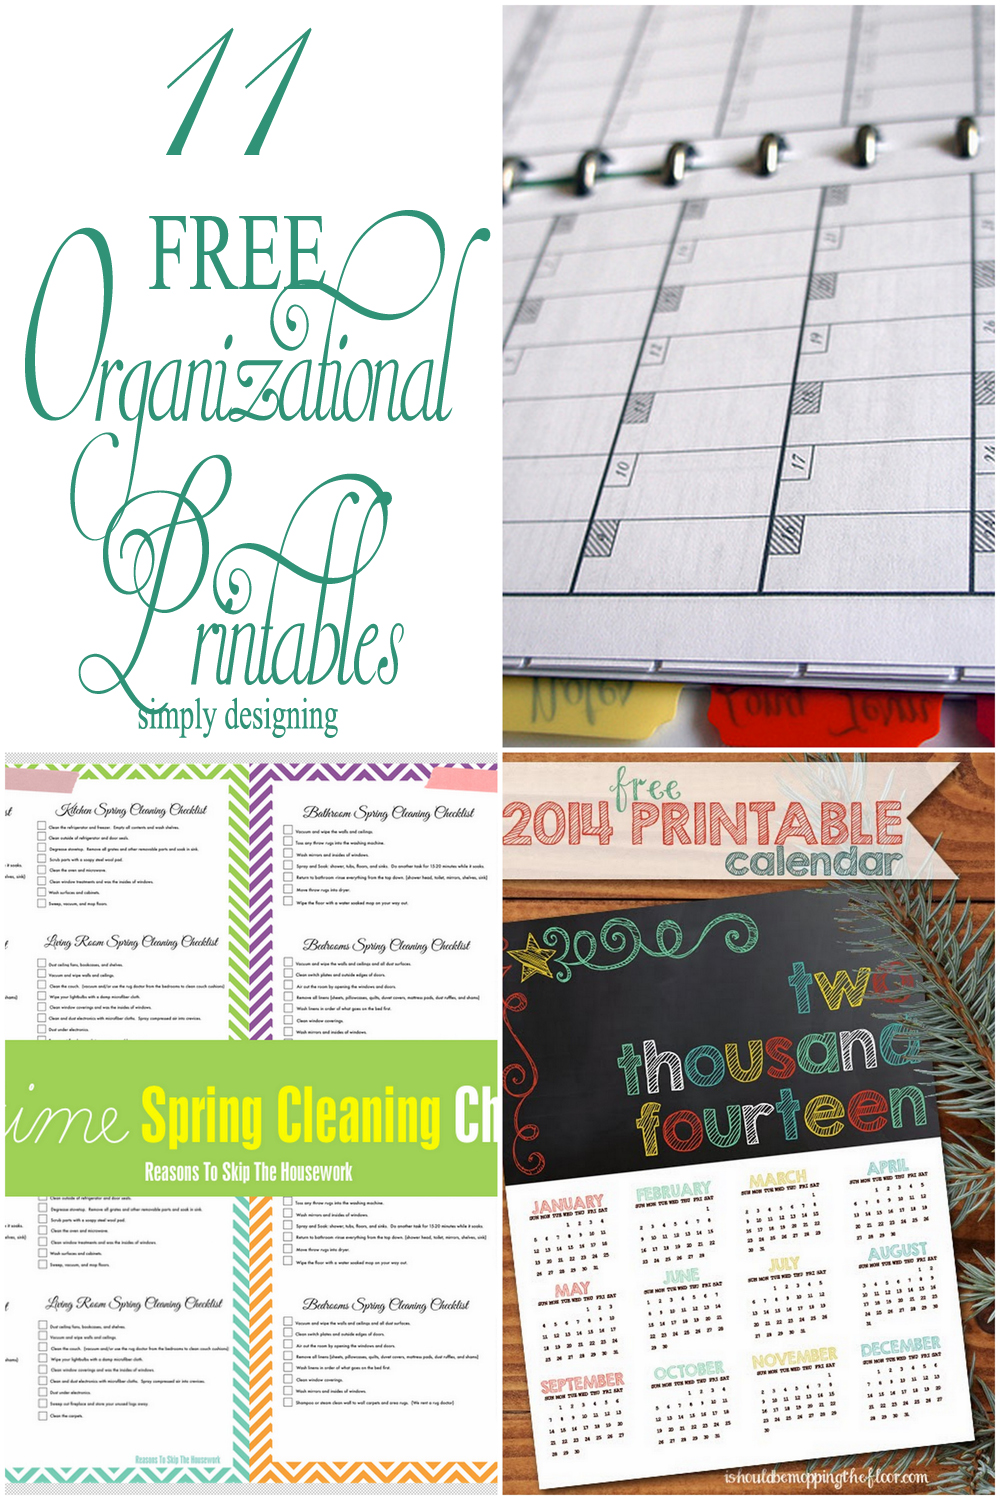 11-free-organizational-printables-simply-designing-with-ashley